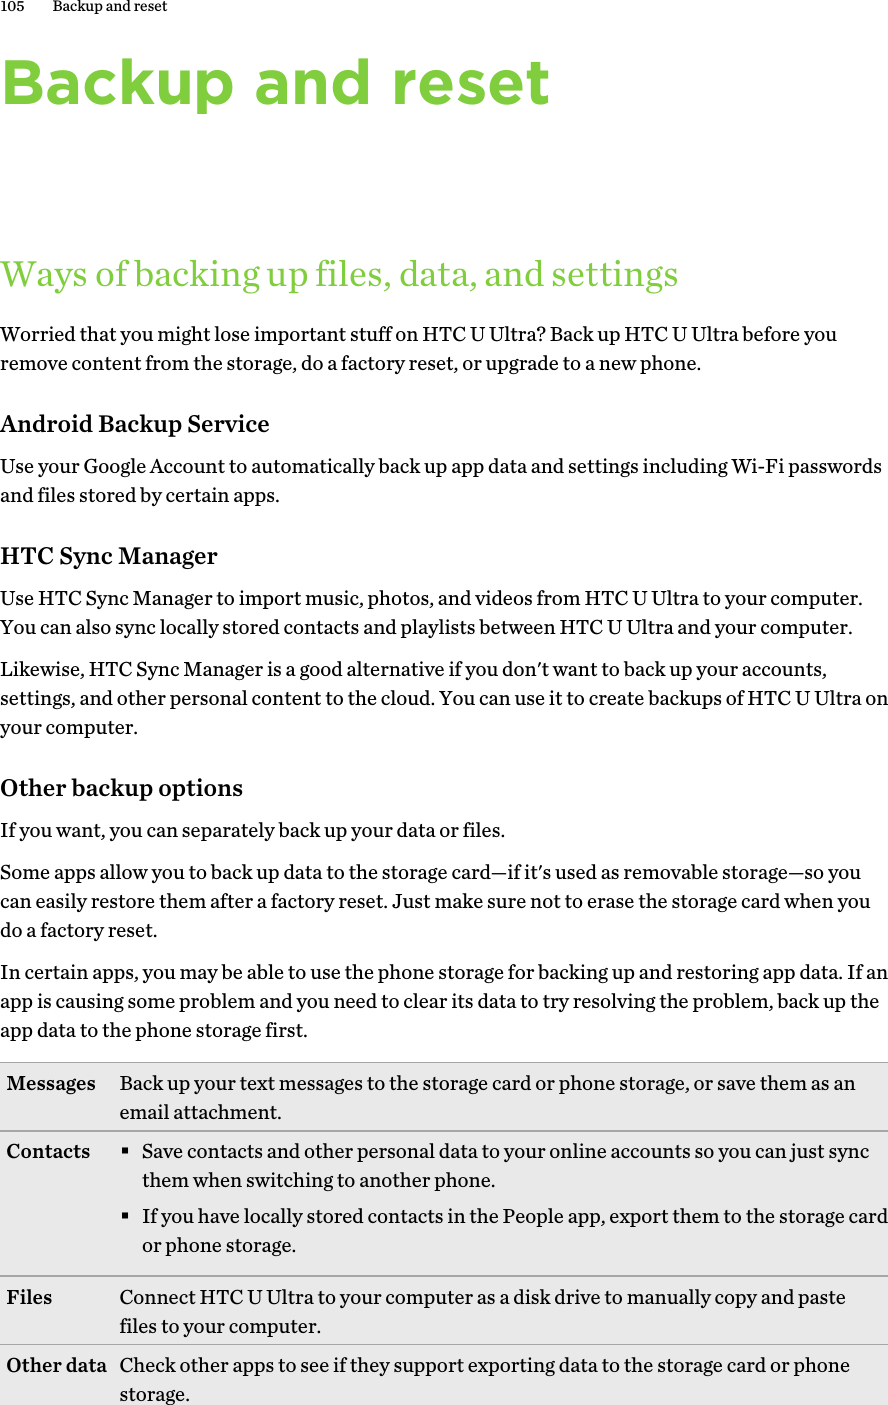 Backup and resetWays of backing up files, data, and settingsWorried that you might lose important stuff on HTC U Ultra? Back up HTC U Ultra before youremove content from the storage, do a factory reset, or upgrade to a new phone.Android Backup ServiceUse your Google Account to automatically back up app data and settings including Wi-Fi passwordsand files stored by certain apps.HTC Sync ManagerUse HTC Sync Manager to import music, photos, and videos from HTC U Ultra to your computer.You can also sync locally stored contacts and playlists between HTC U Ultra and your computer.Likewise, HTC Sync Manager is a good alternative if you don&apos;t want to back up your accounts,settings, and other personal content to the cloud. You can use it to create backups of HTC U Ultra onyour computer.Other backup optionsIf you want, you can separately back up your data or files.Some apps allow you to back up data to the storage card—if it&apos;s used as removable storage—so youcan easily restore them after a factory reset. Just make sure not to erase the storage card when youdo a factory reset.In certain apps, you may be able to use the phone storage for backing up and restoring app data. If anapp is causing some problem and you need to clear its data to try resolving the problem, back up theapp data to the phone storage first.Messages Back up your text messages to the storage card or phone storage, or save them as anemail attachment.Contacts §Save contacts and other personal data to your online accounts so you can just syncthem when switching to another phone.§If you have locally stored contacts in the People app, export them to the storage cardor phone storage.Files Connect HTC U Ultra to your computer as a disk drive to manually copy and pastefiles to your computer.Other data Check other apps to see if they support exporting data to the storage card or phonestorage.105 Backup and reset